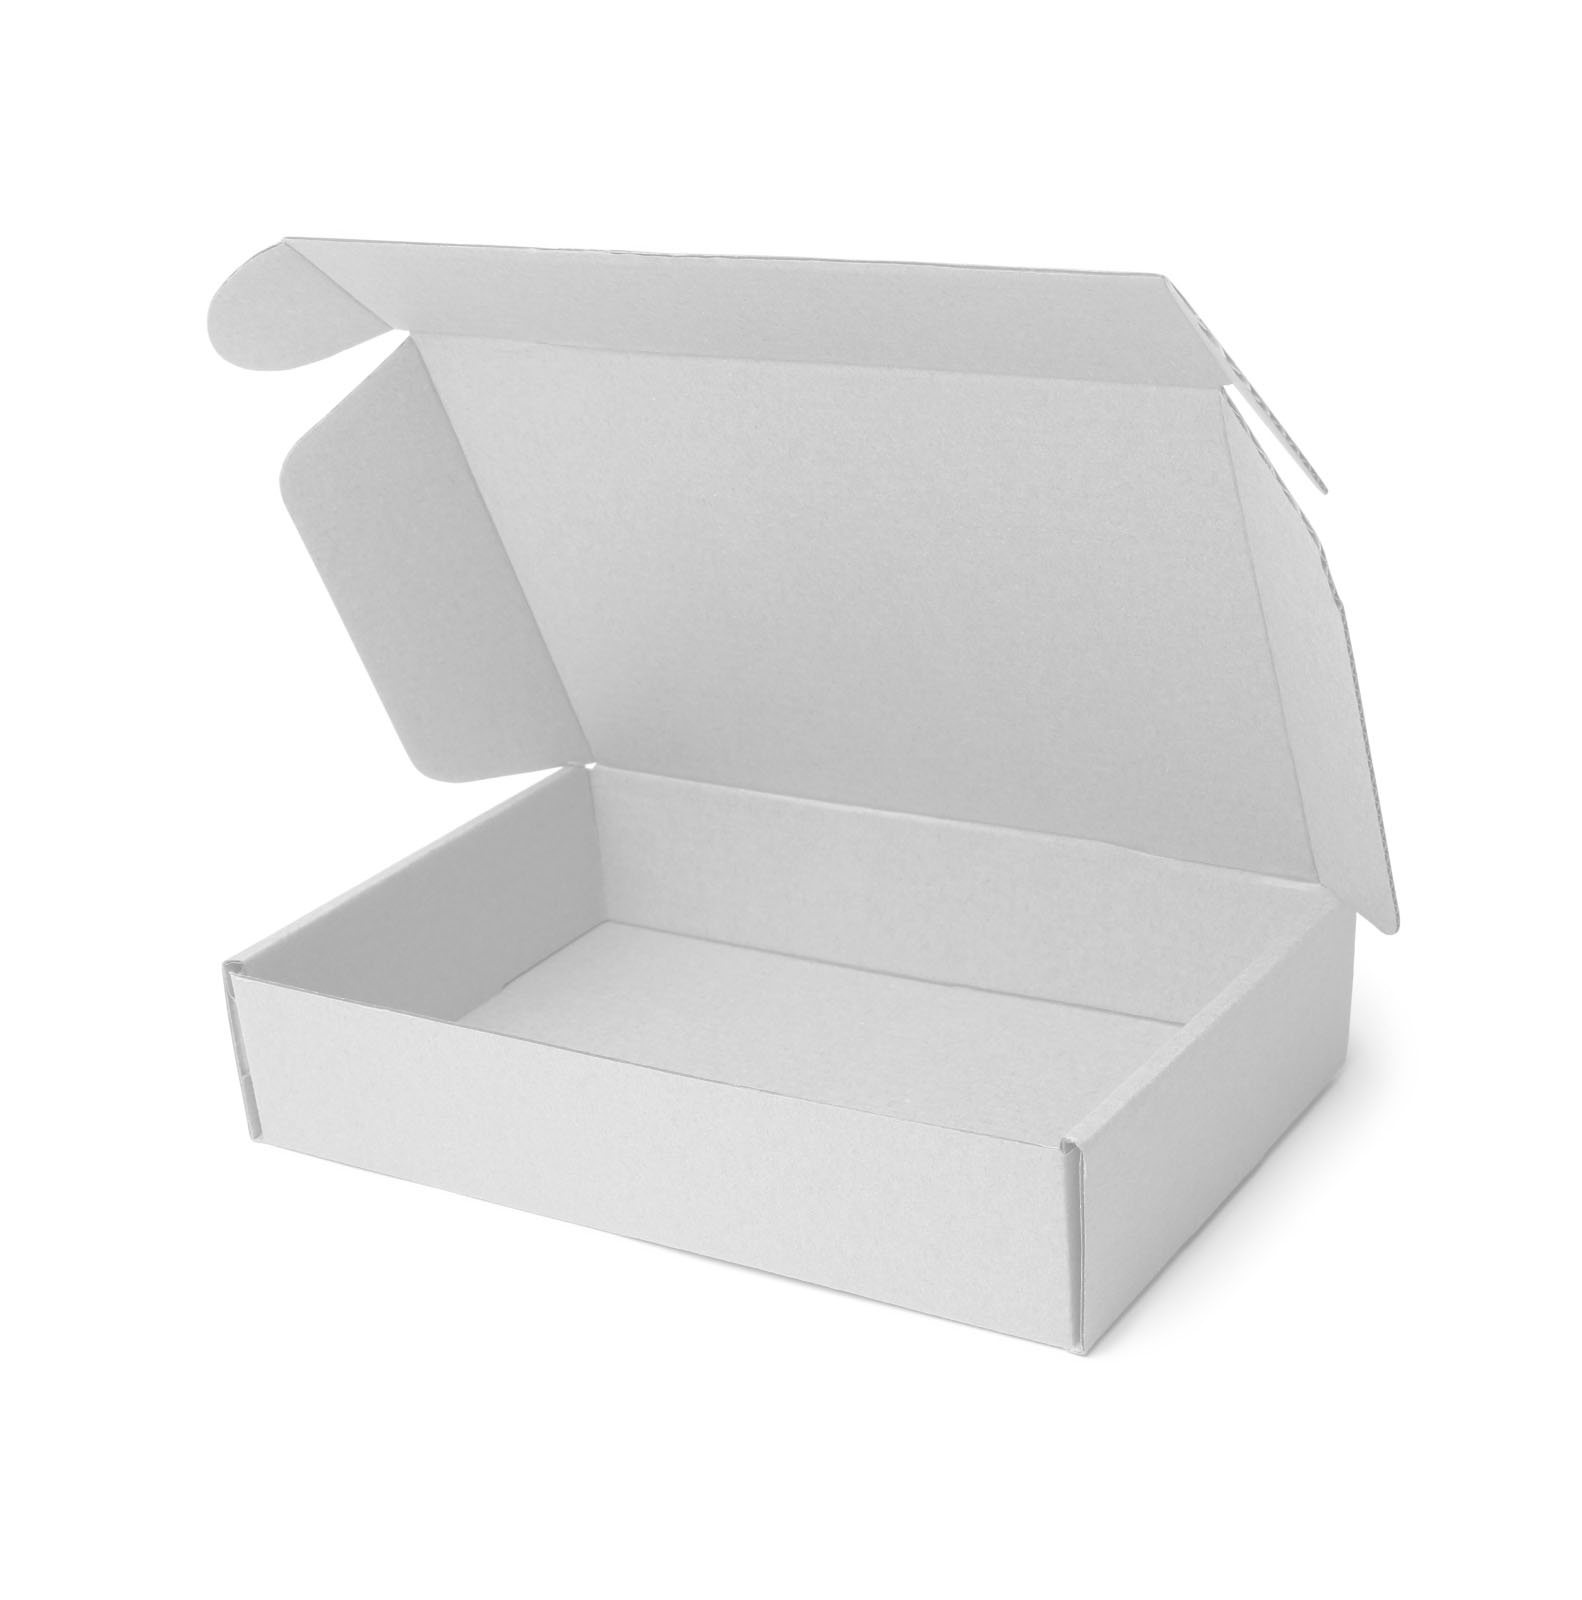 White boxes can be printed make a real impact on your packaging